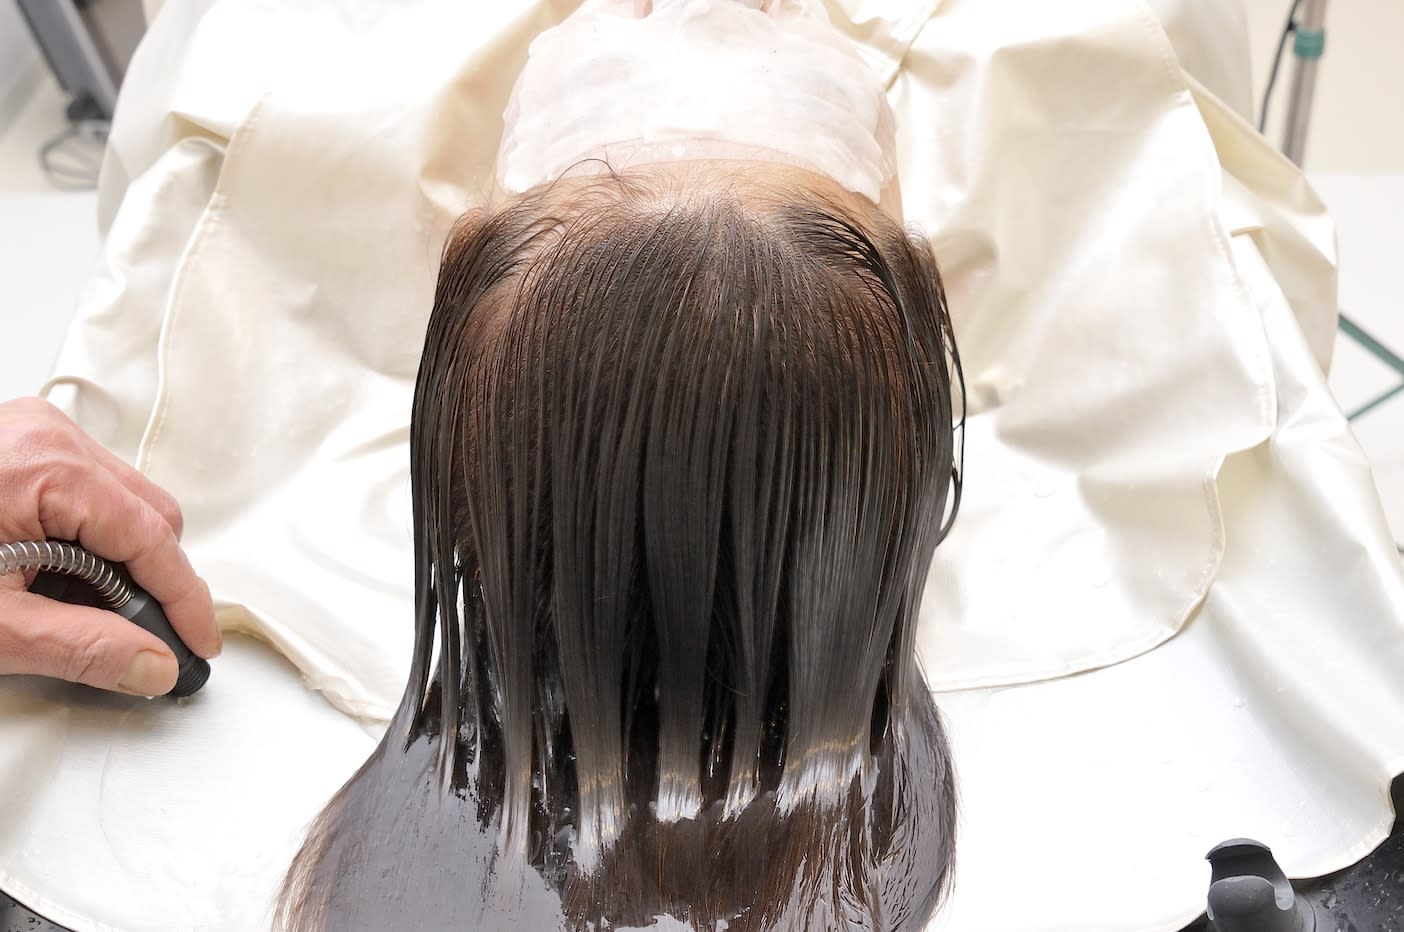 Personal Hygiene Has Nothing To Do With Head Lice Experts